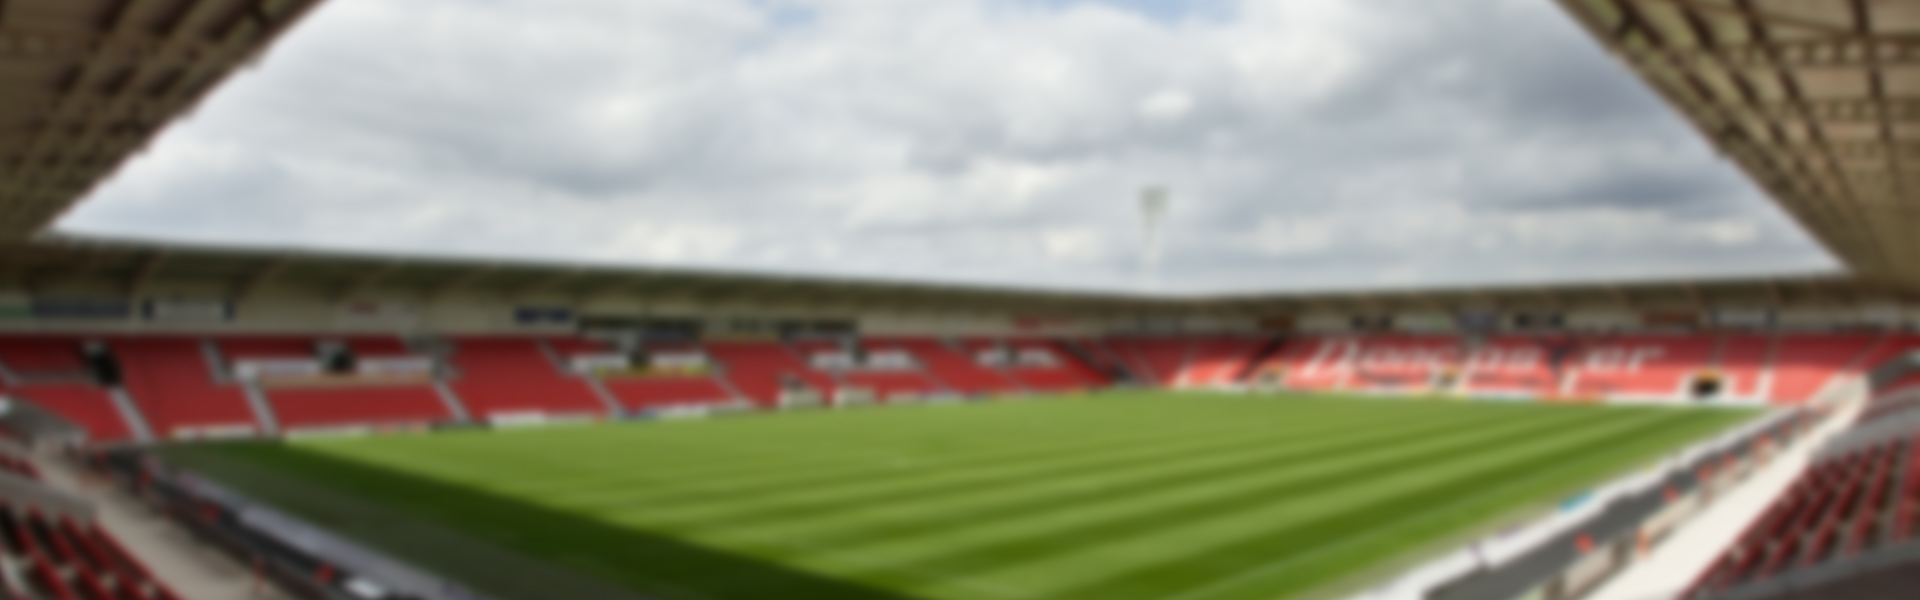 Club Doncaster Foundation to showcase the charity at designated Community Day fixture